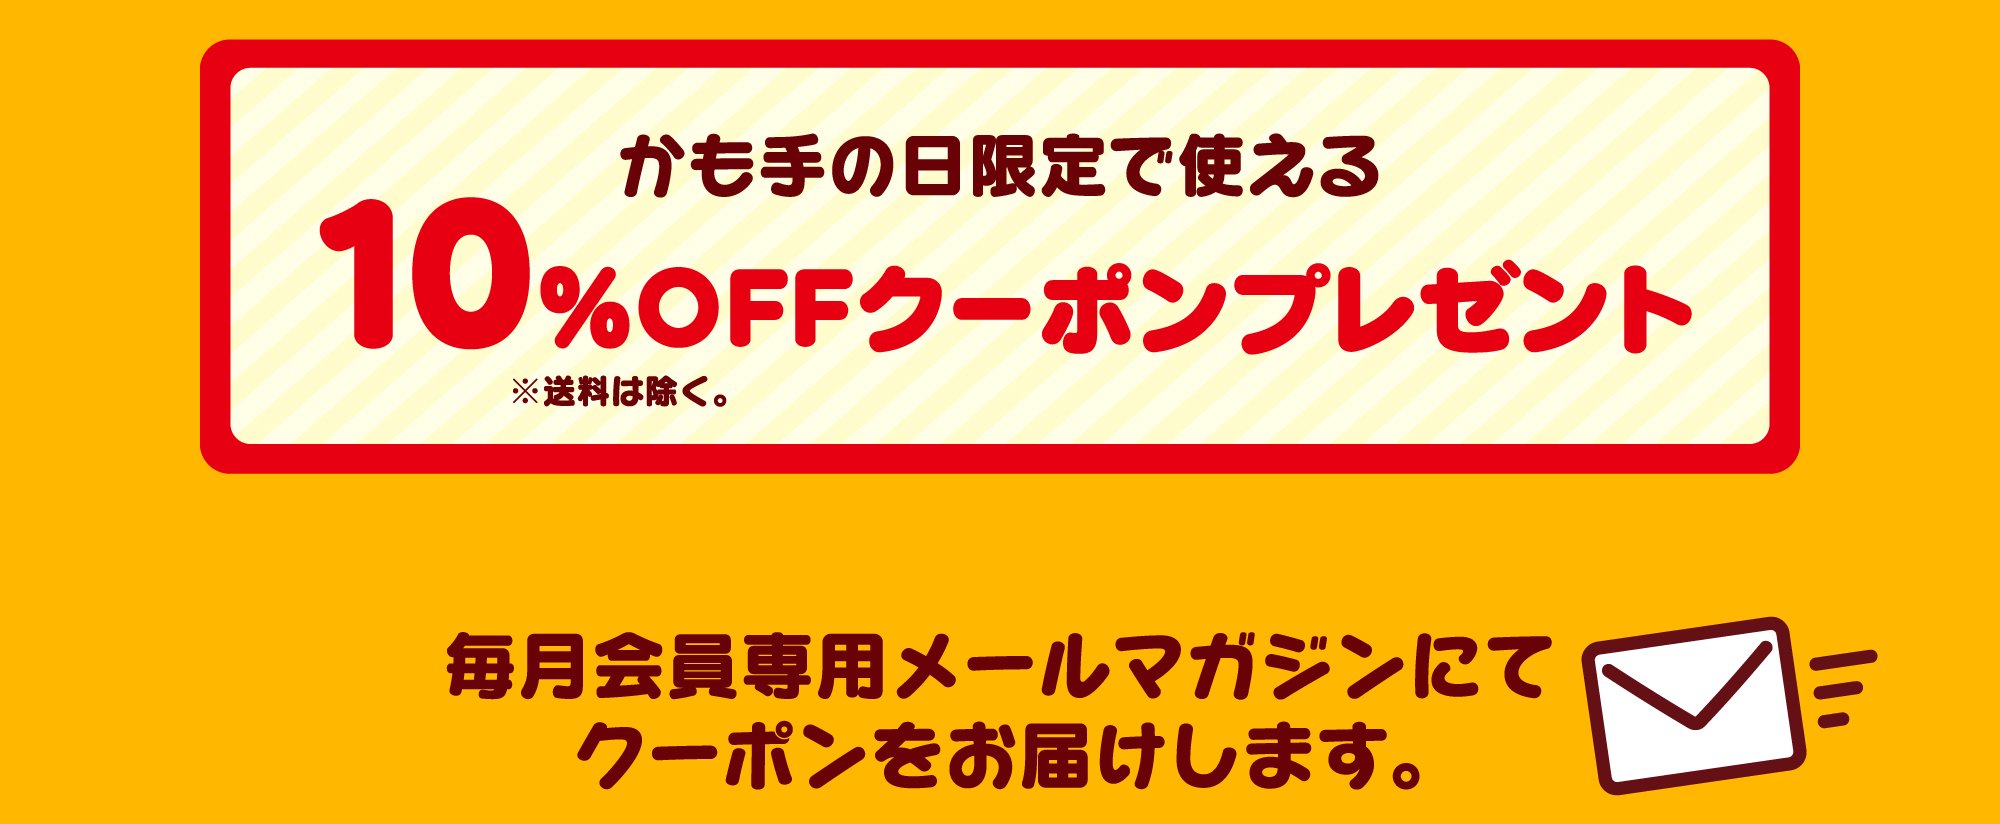 10%OFFクーポンプレゼント